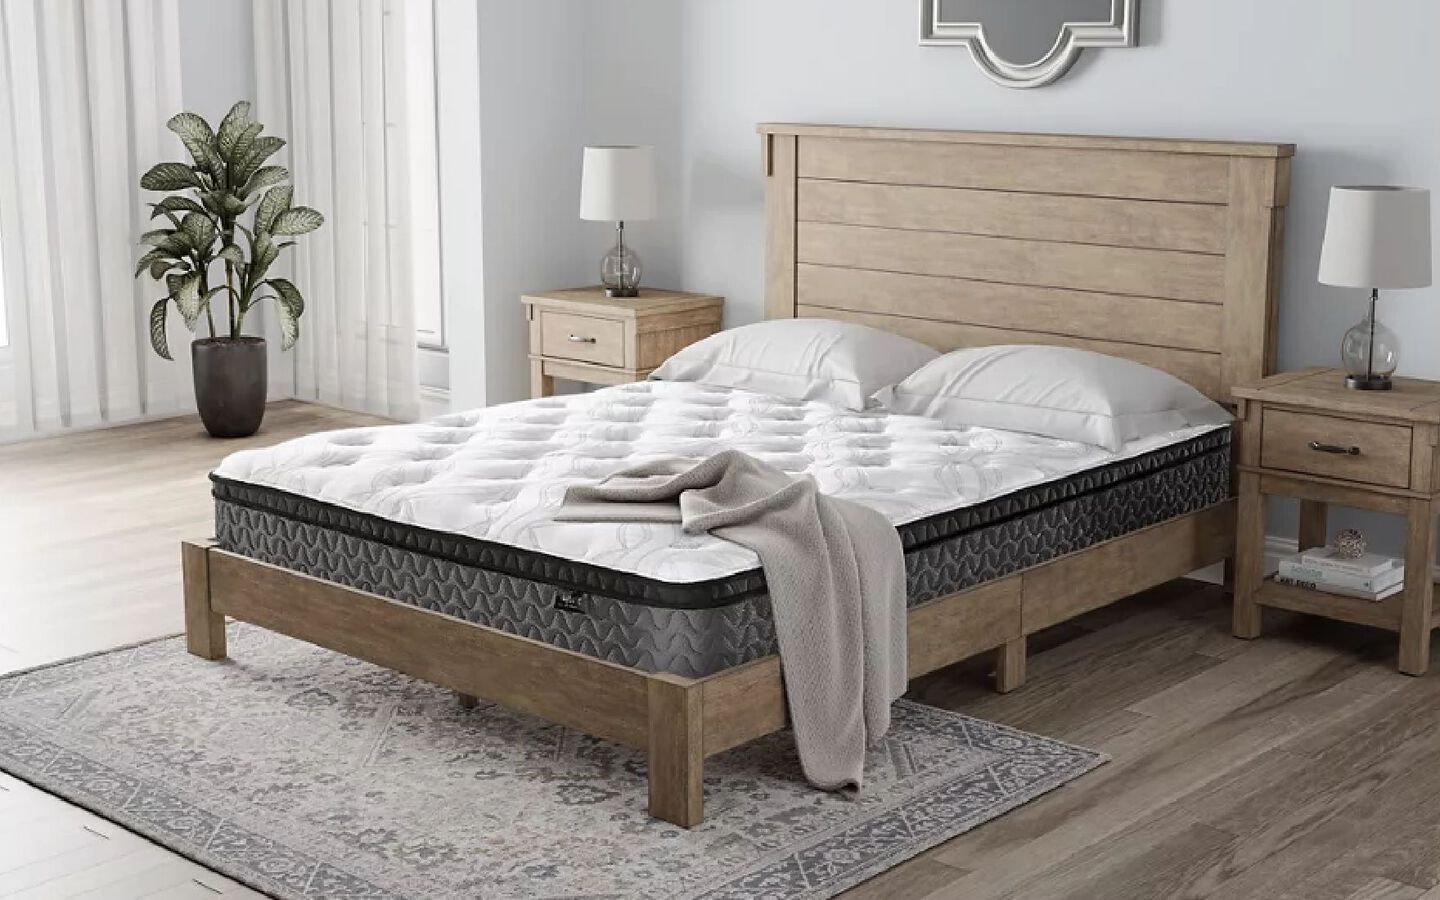 Grey and white mattress on a wooden panel bedframe in the middle of a bedroom setting